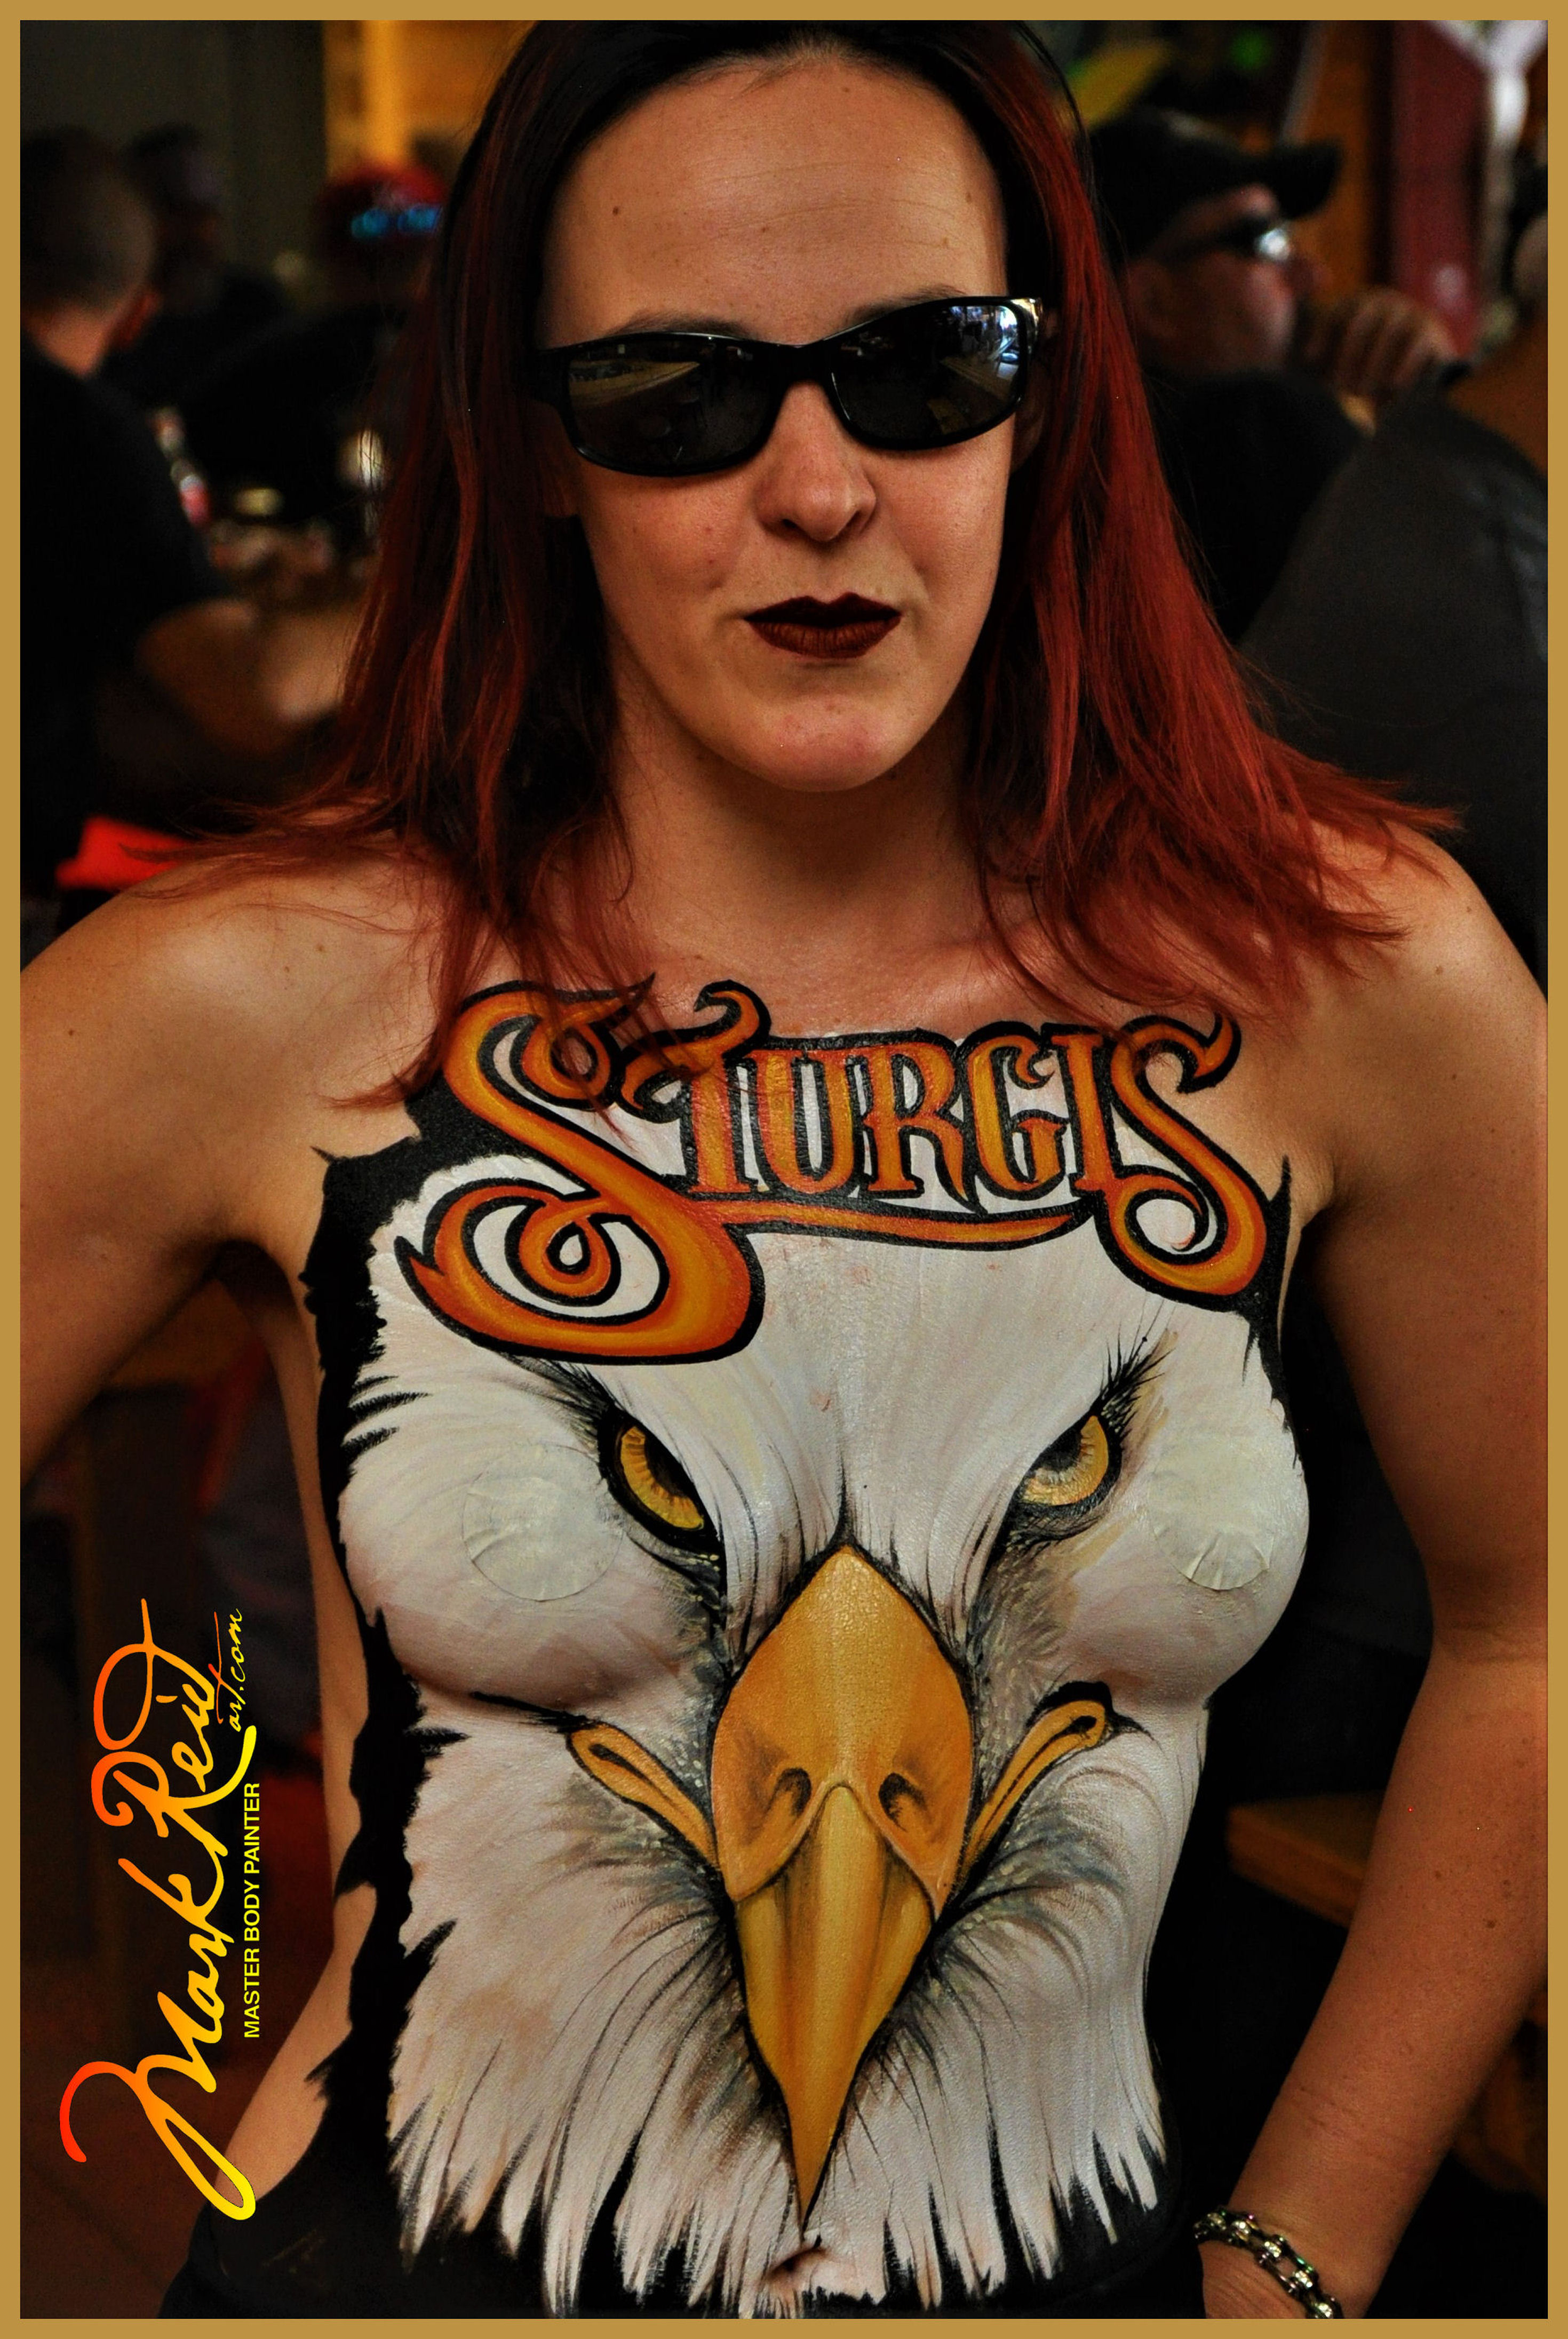 model with long red hair with a body painting of a close up of an eagle's face on her chest and the word Sturgis above it